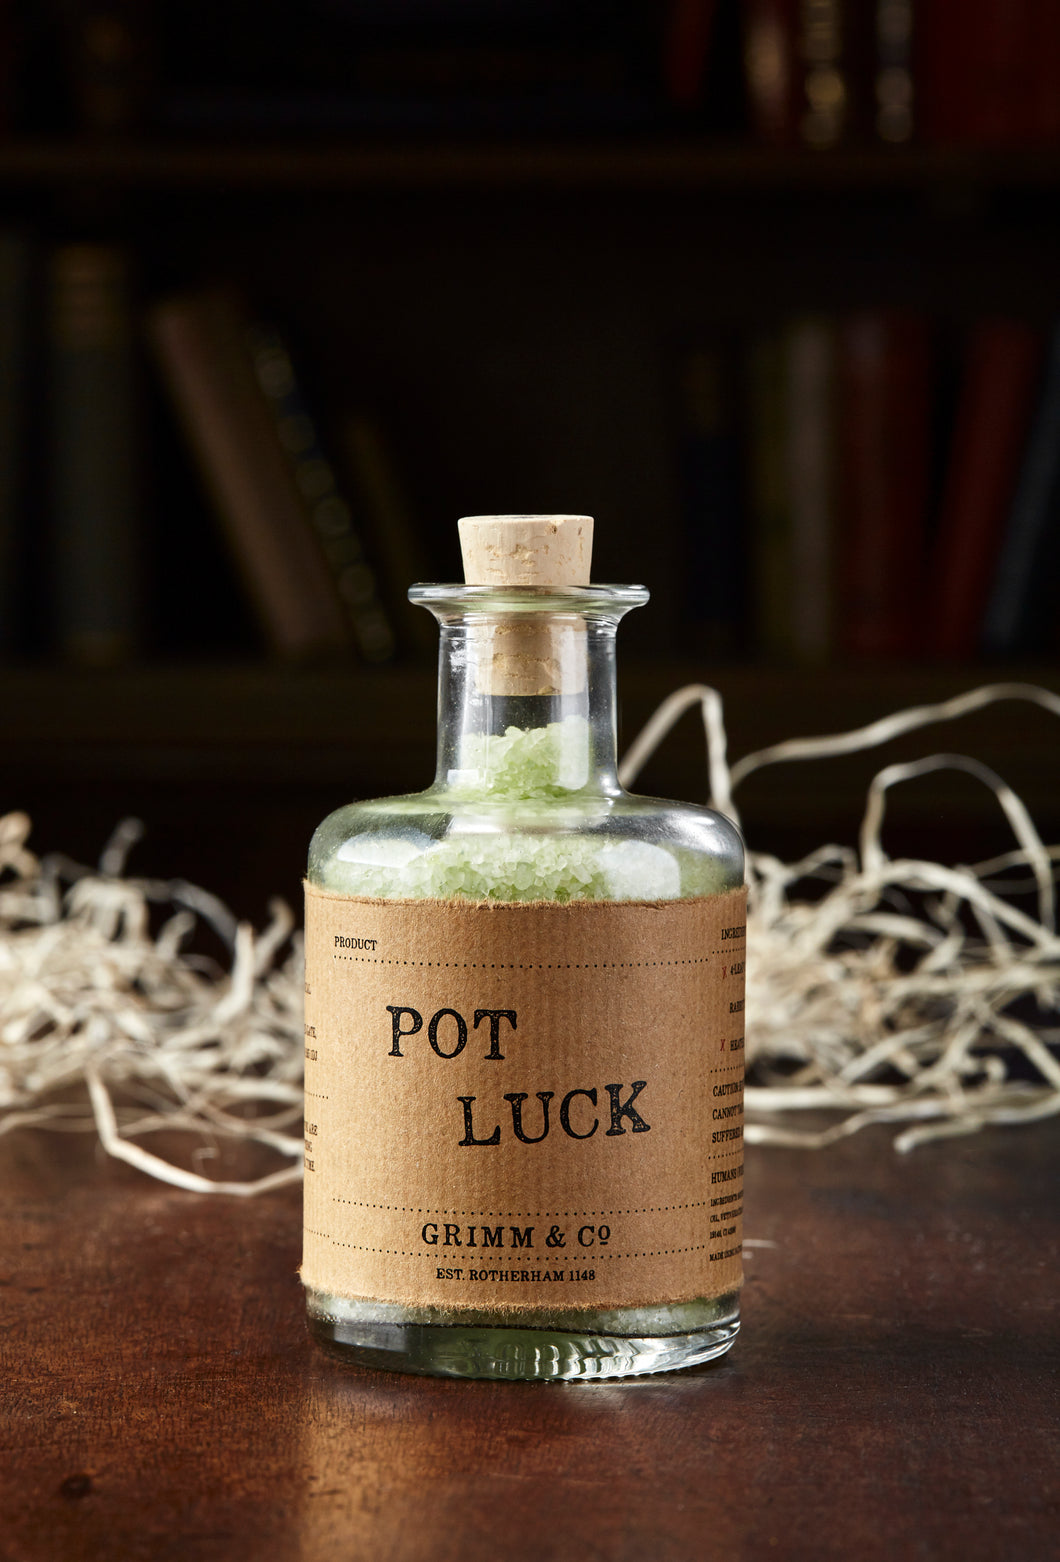 Image of Pot Luck, otherwise known as scented pale green bath salts in a glass bottle with cork.